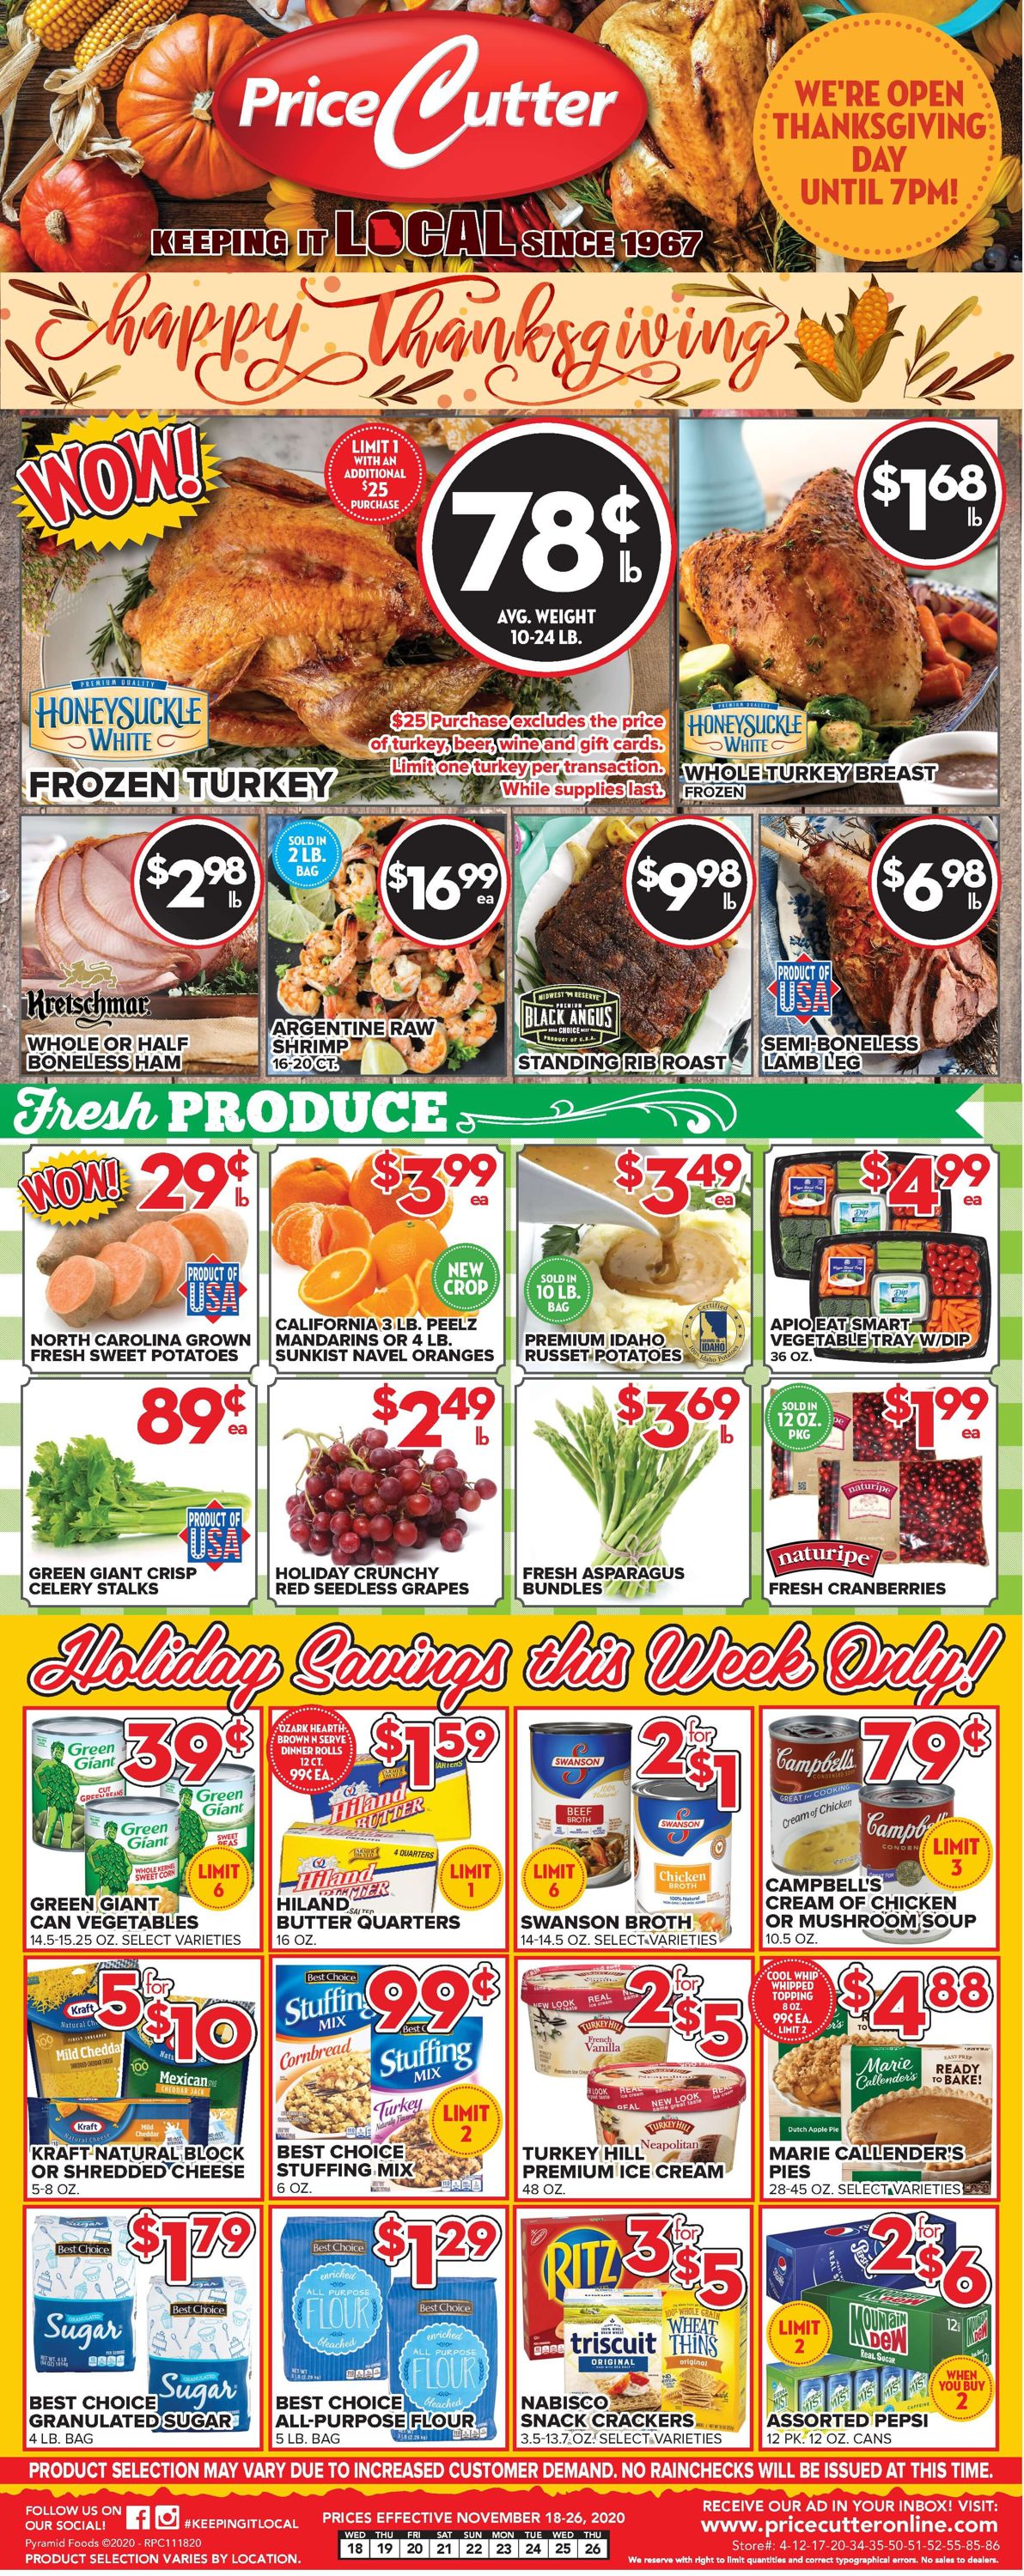 Price Cutter Thanksgiving ad 2020 Weekly Ad Circular - valid 11/18-11/26/2020